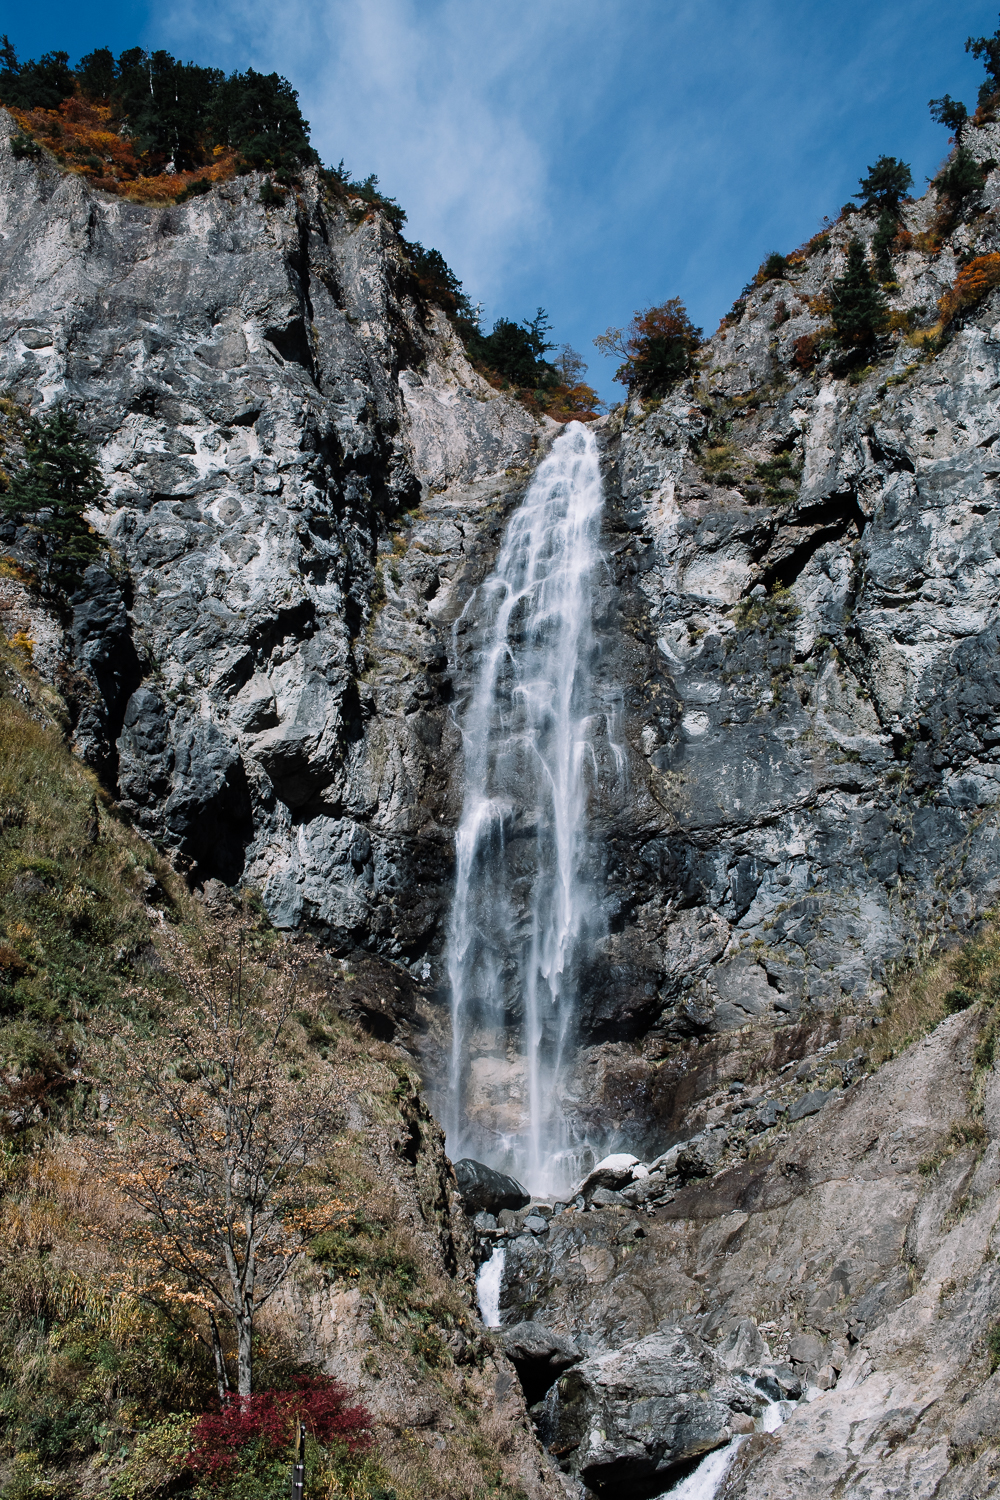 Waterfall against blue rock along the White Road, the scenic highway to Shirakawa-go.